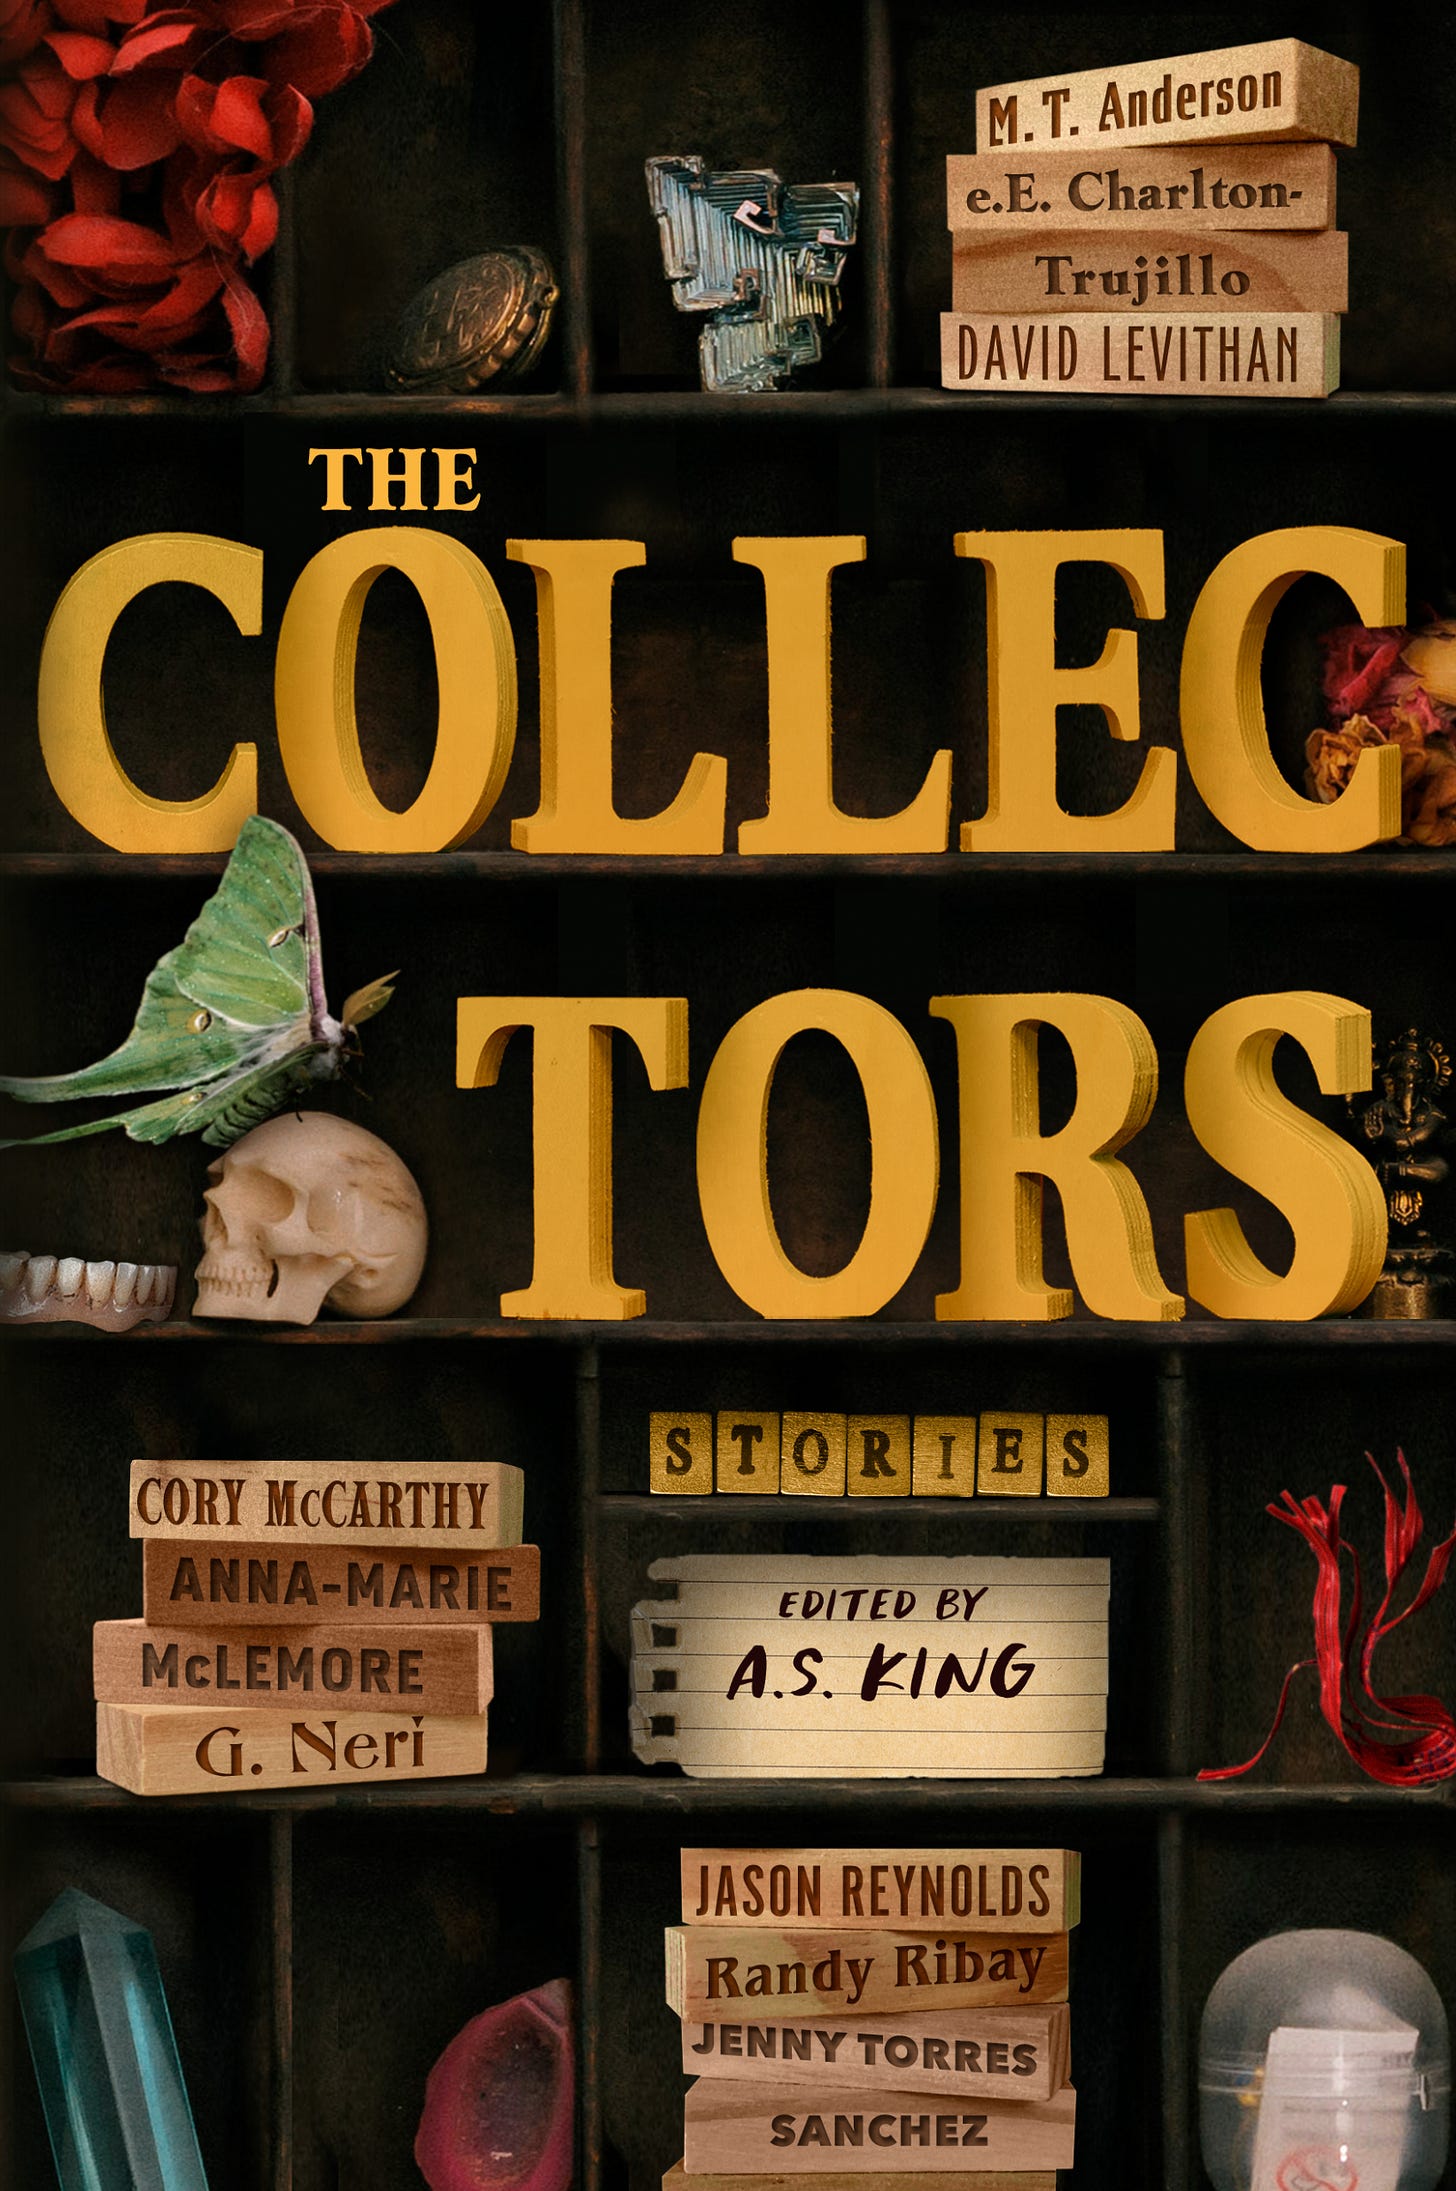 The cover of The Collectors shows a dark bookshelf with various curios, and the authors' names stacked on the shelves.